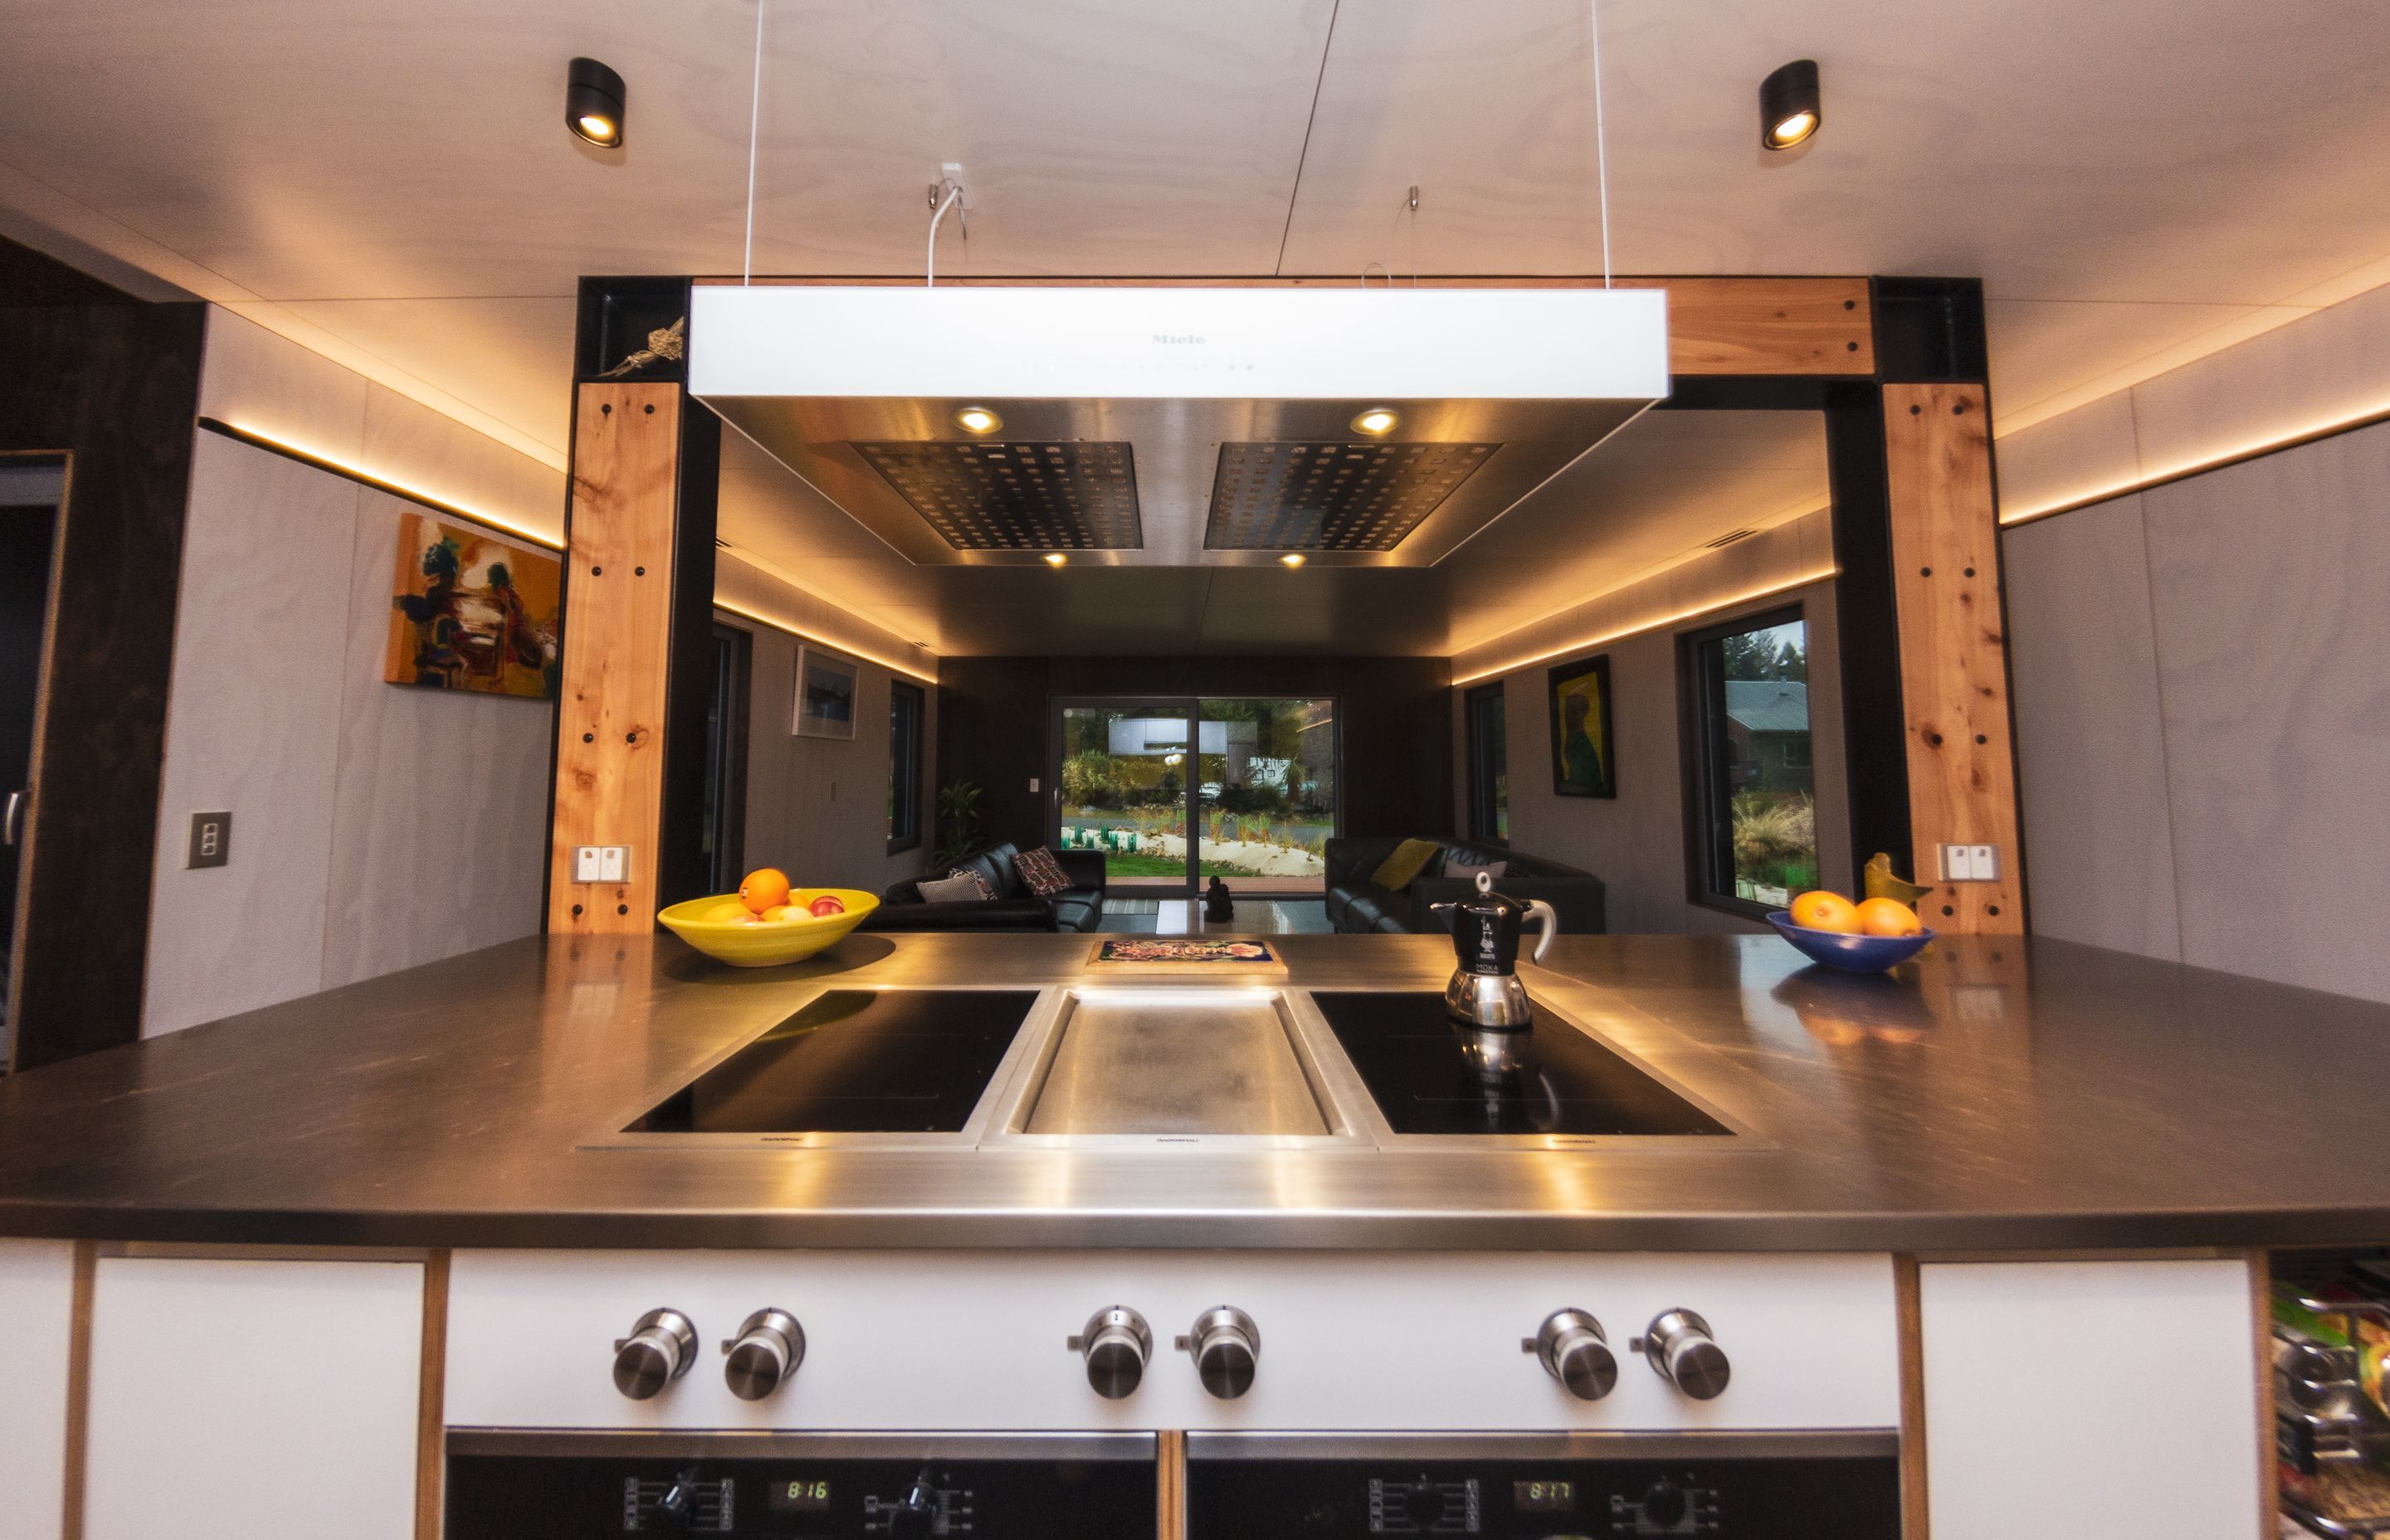 A functional kitchen allows large meals to be prepared.